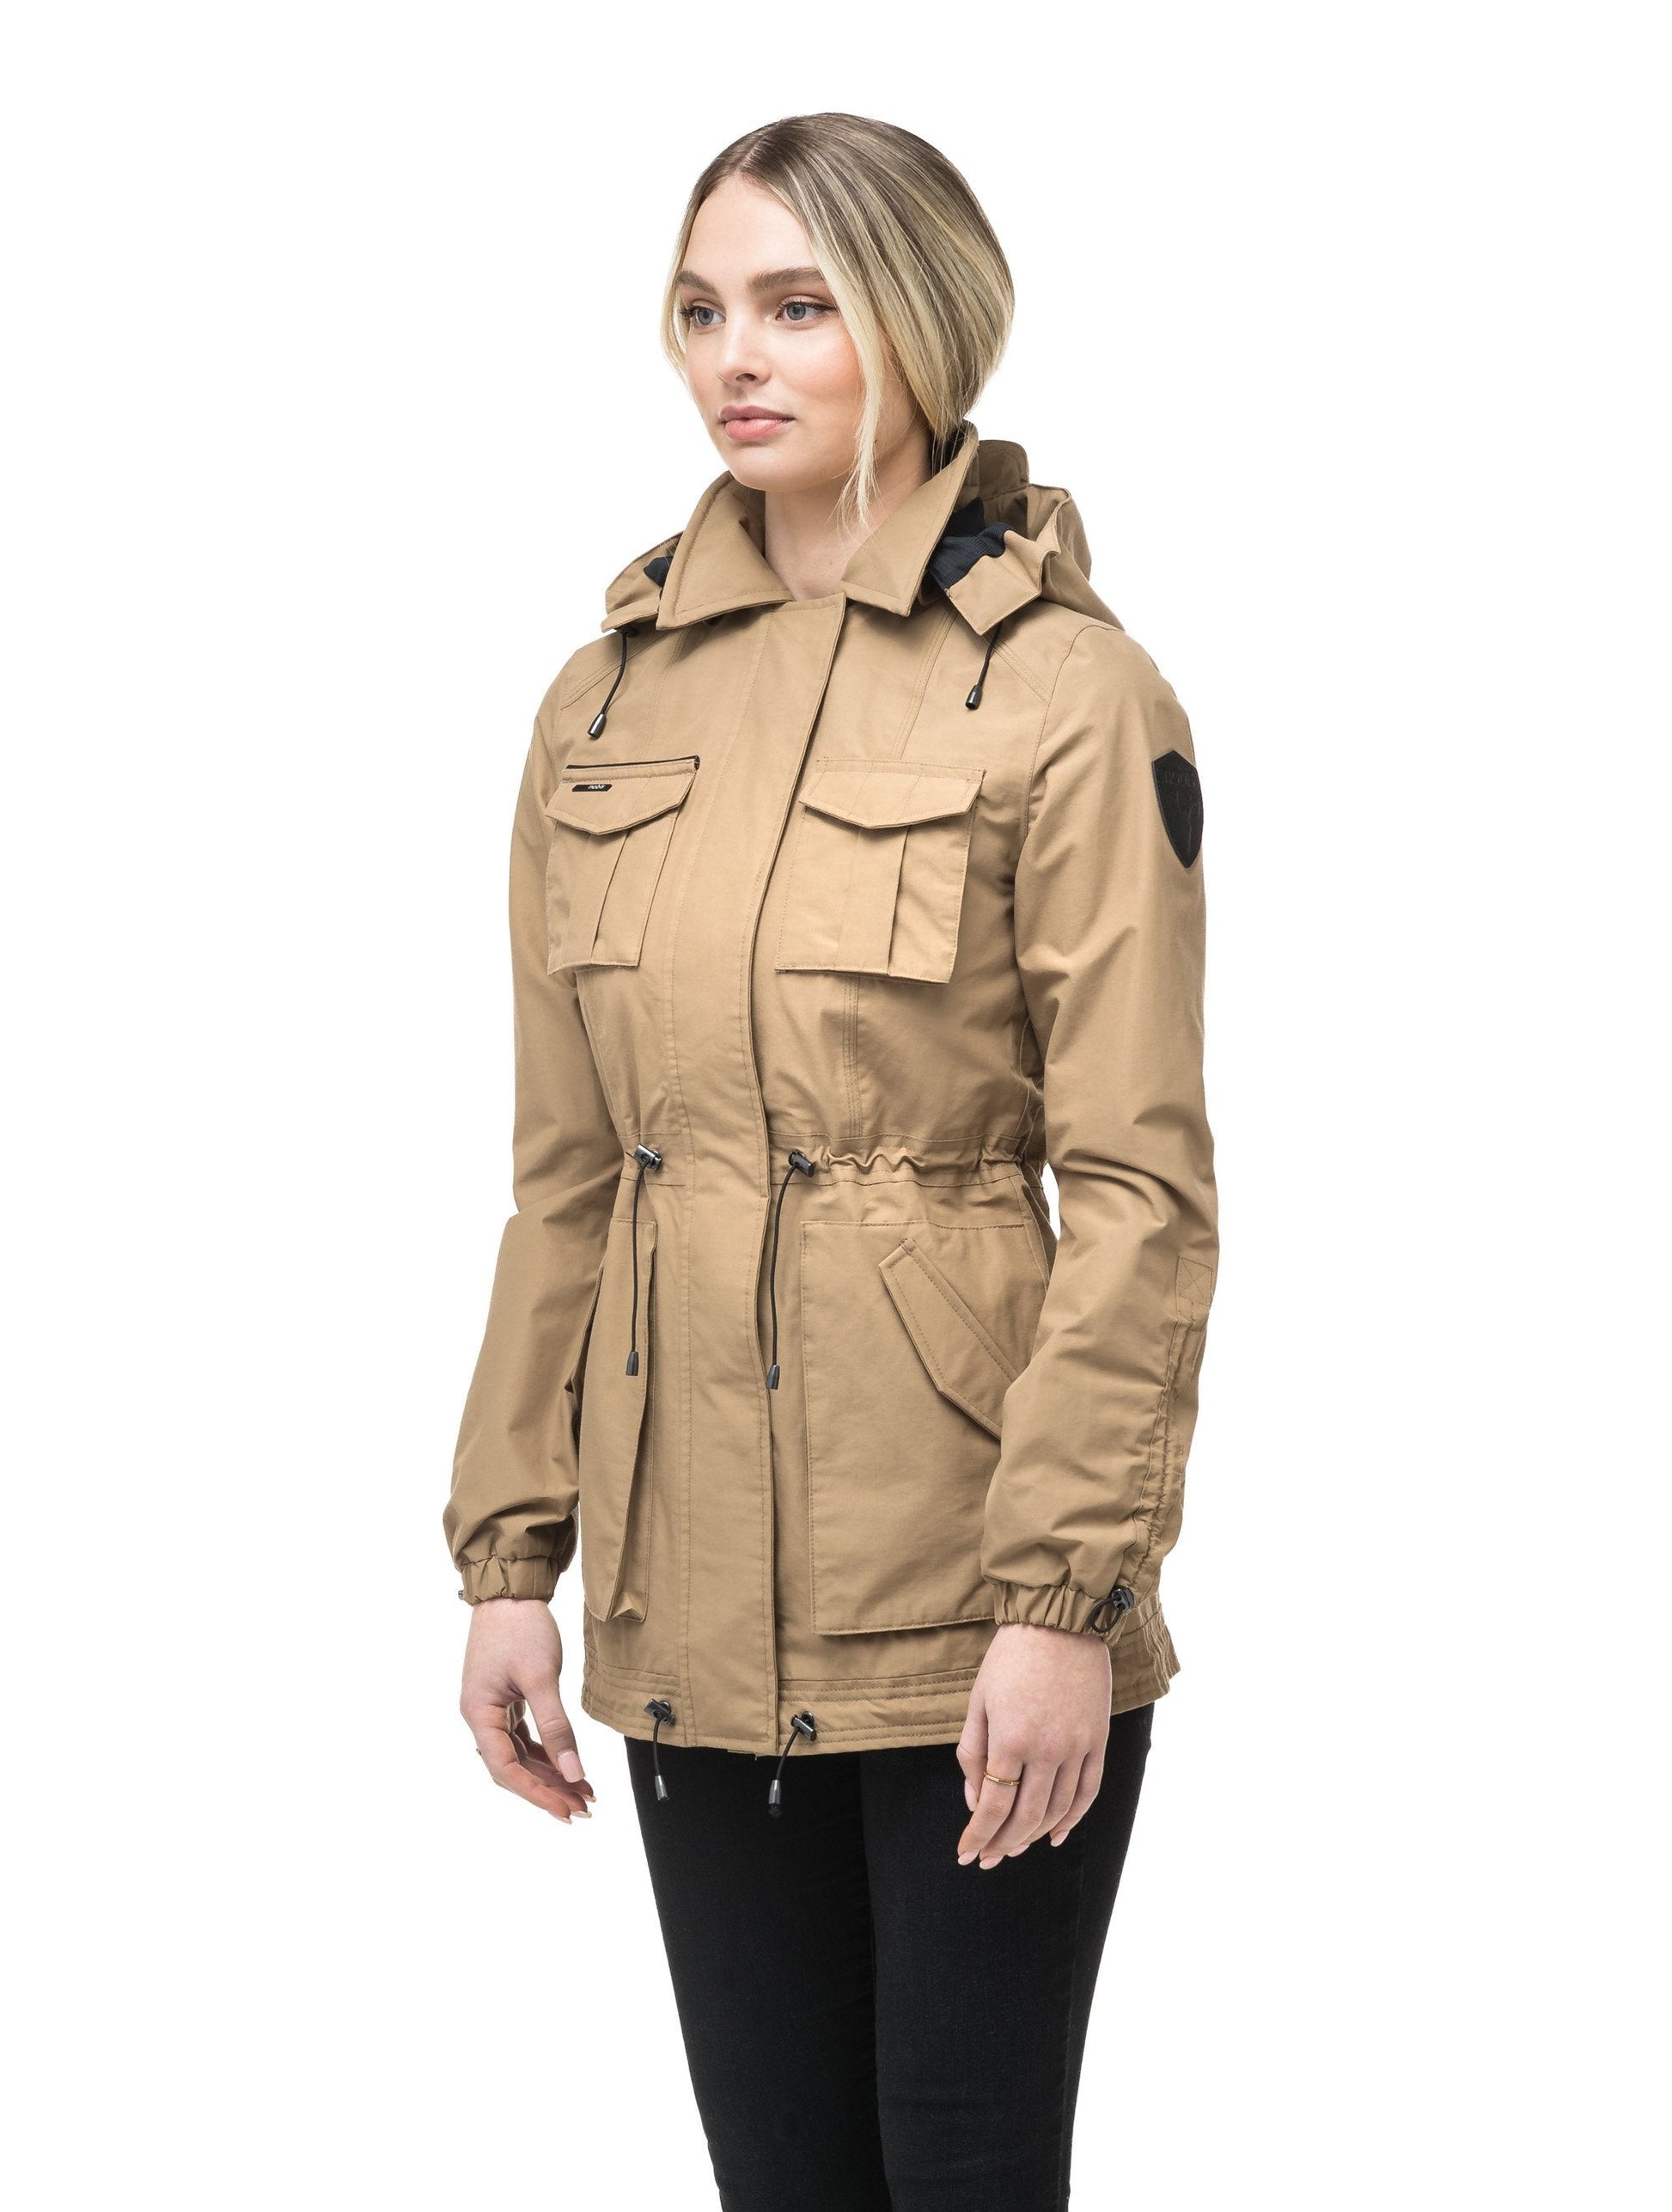 Women's hooded shirt jacket with four front pockets and adjustable waist in Cork